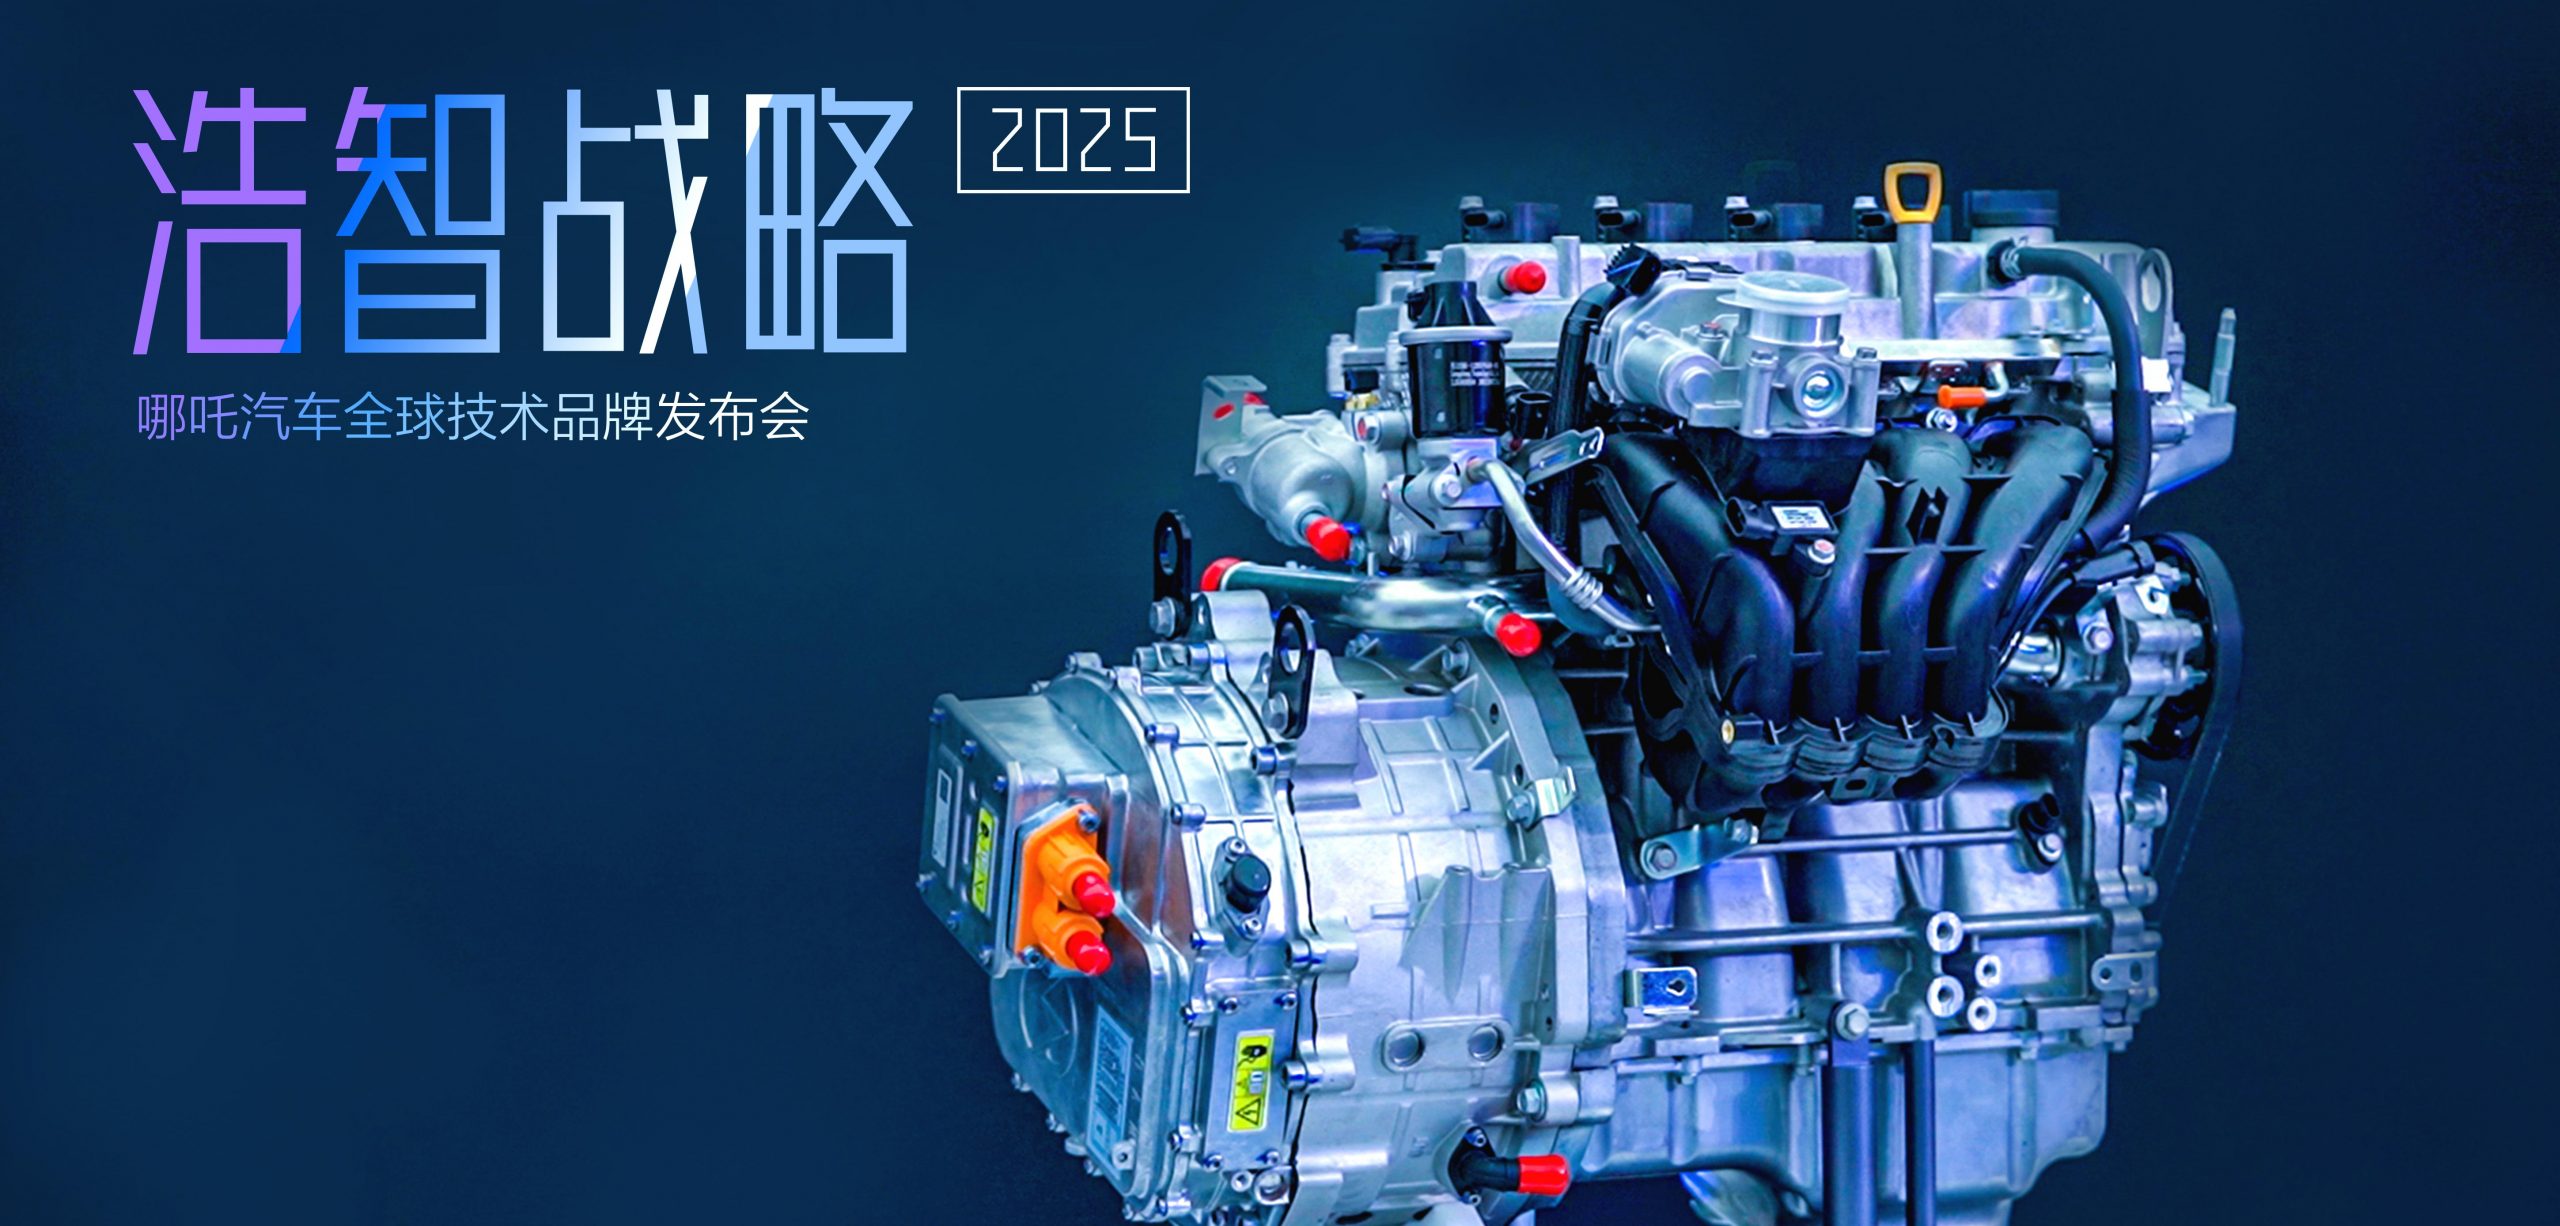 What other highlights does Nezha's Haohi platform have besides the supercomputing chip, high-performance electric drive, and extended range?